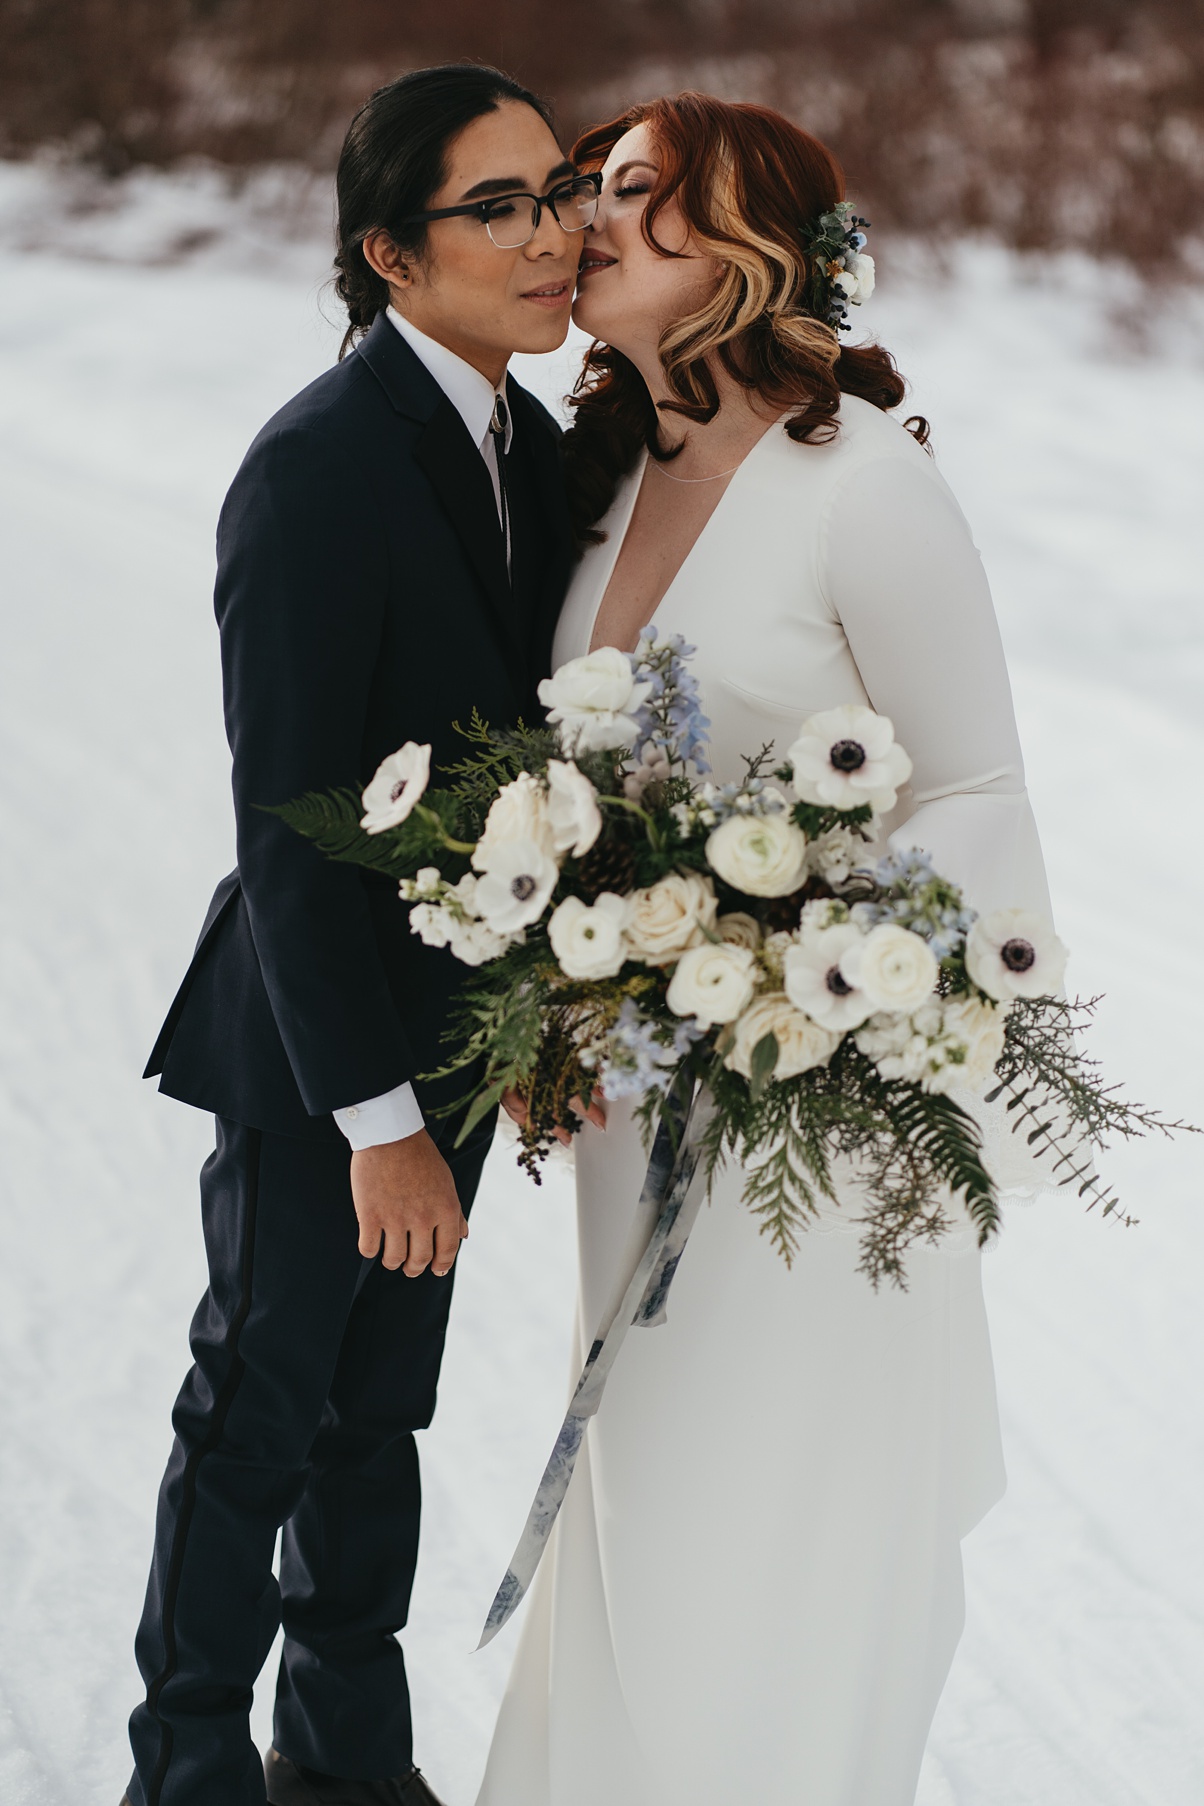 The couple embracing in the snow, holding the bouquet